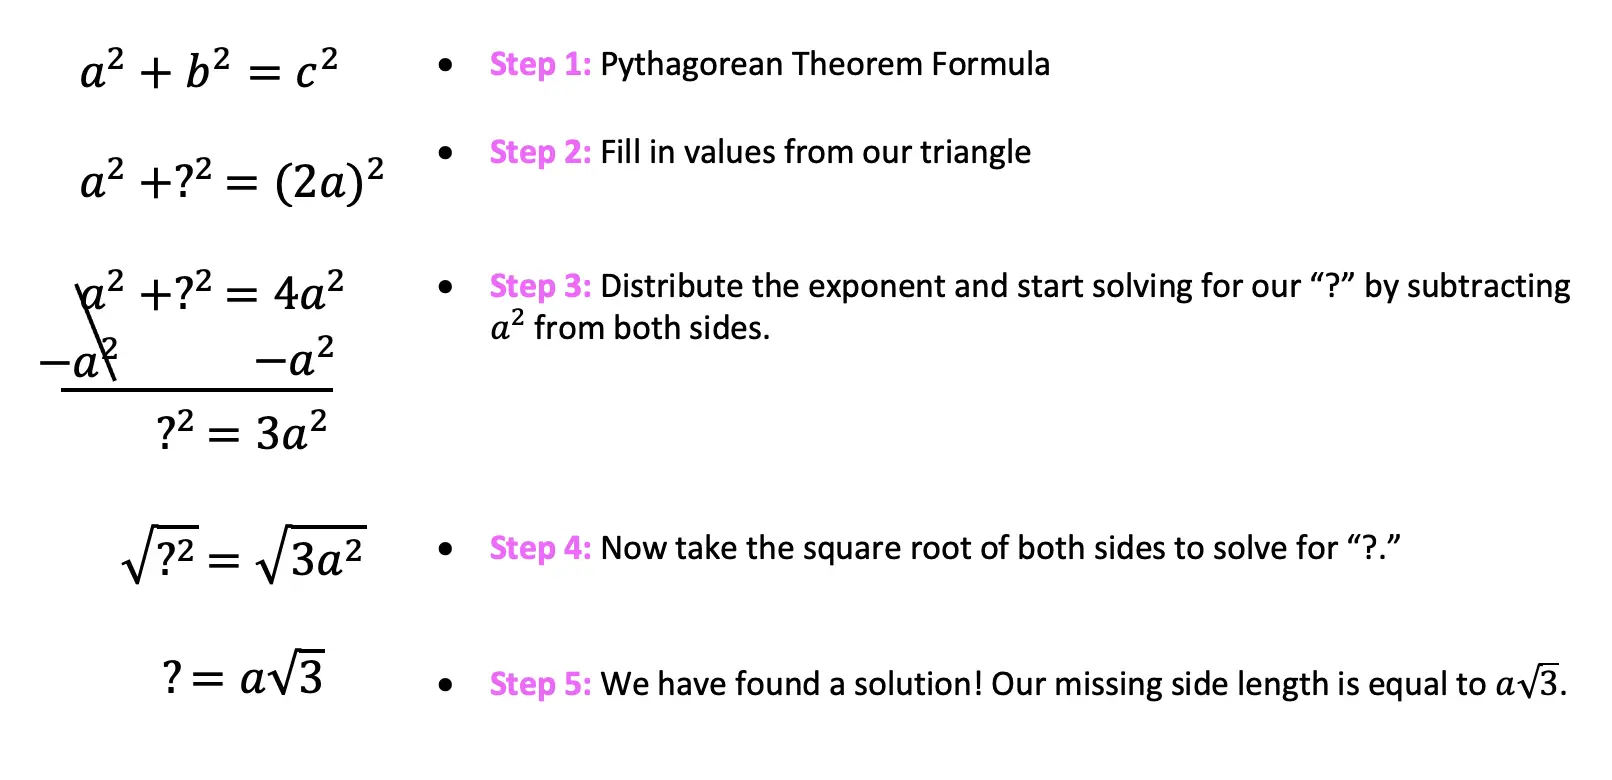 Pythagorean Theorem Formula
Fill in values from our triangle longer leg
Distribute the exponent and start solving for our “?” by subtracting a^2 from both sides.
Now take the square root of both sides to solve for “?.”	We have found a solution! Our missing side length is equal to a√3.